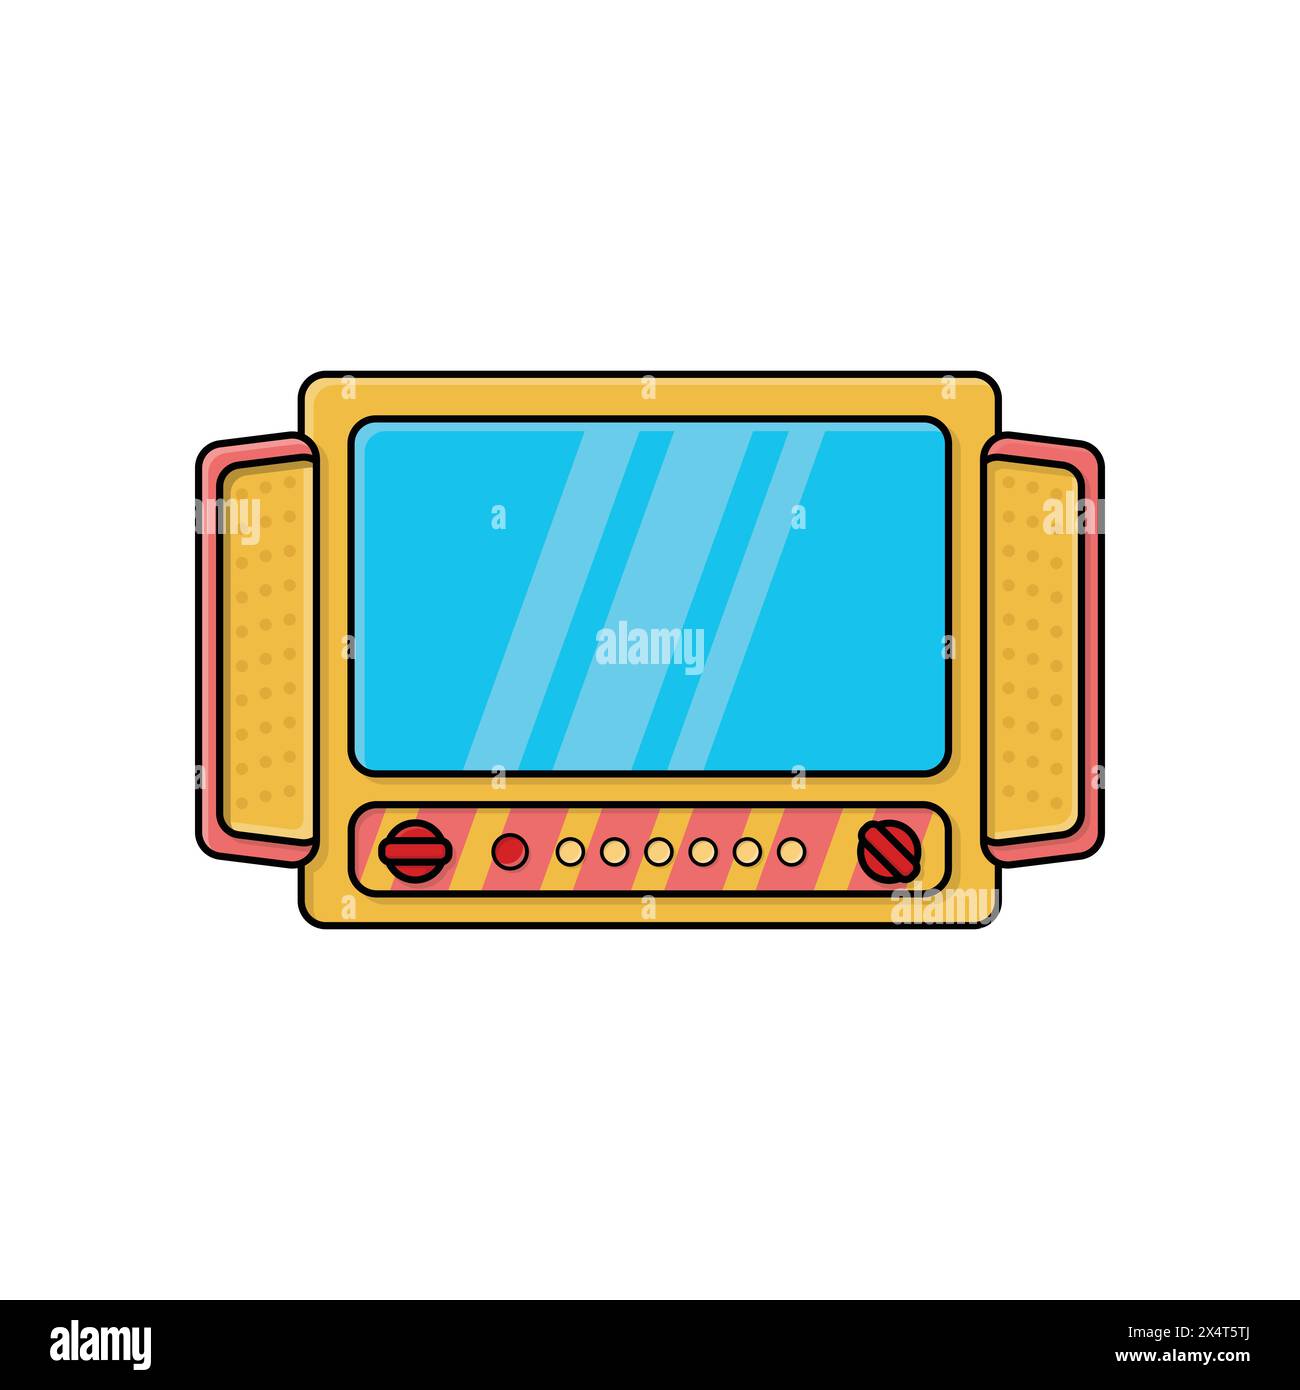 Retro videogame cartoon style illustration of retro videogame console vector icon for web design and technology industry theme Stock Vector